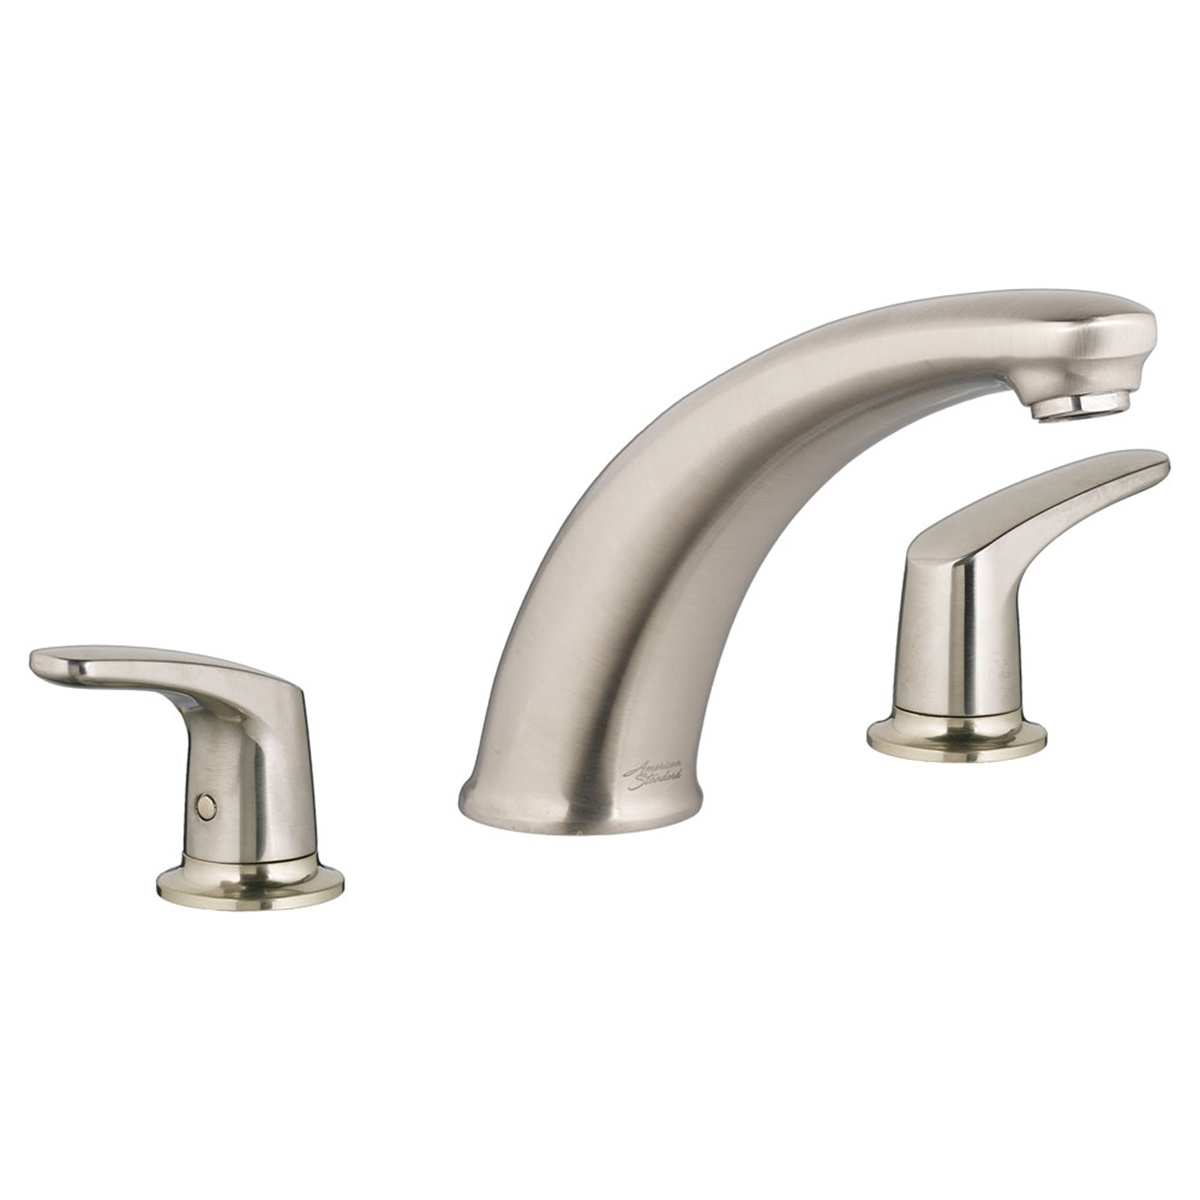 T075.900.295 COLONY PRO DECK
MOUNT TUB FILLER BRUSHED
NICKEL A/S